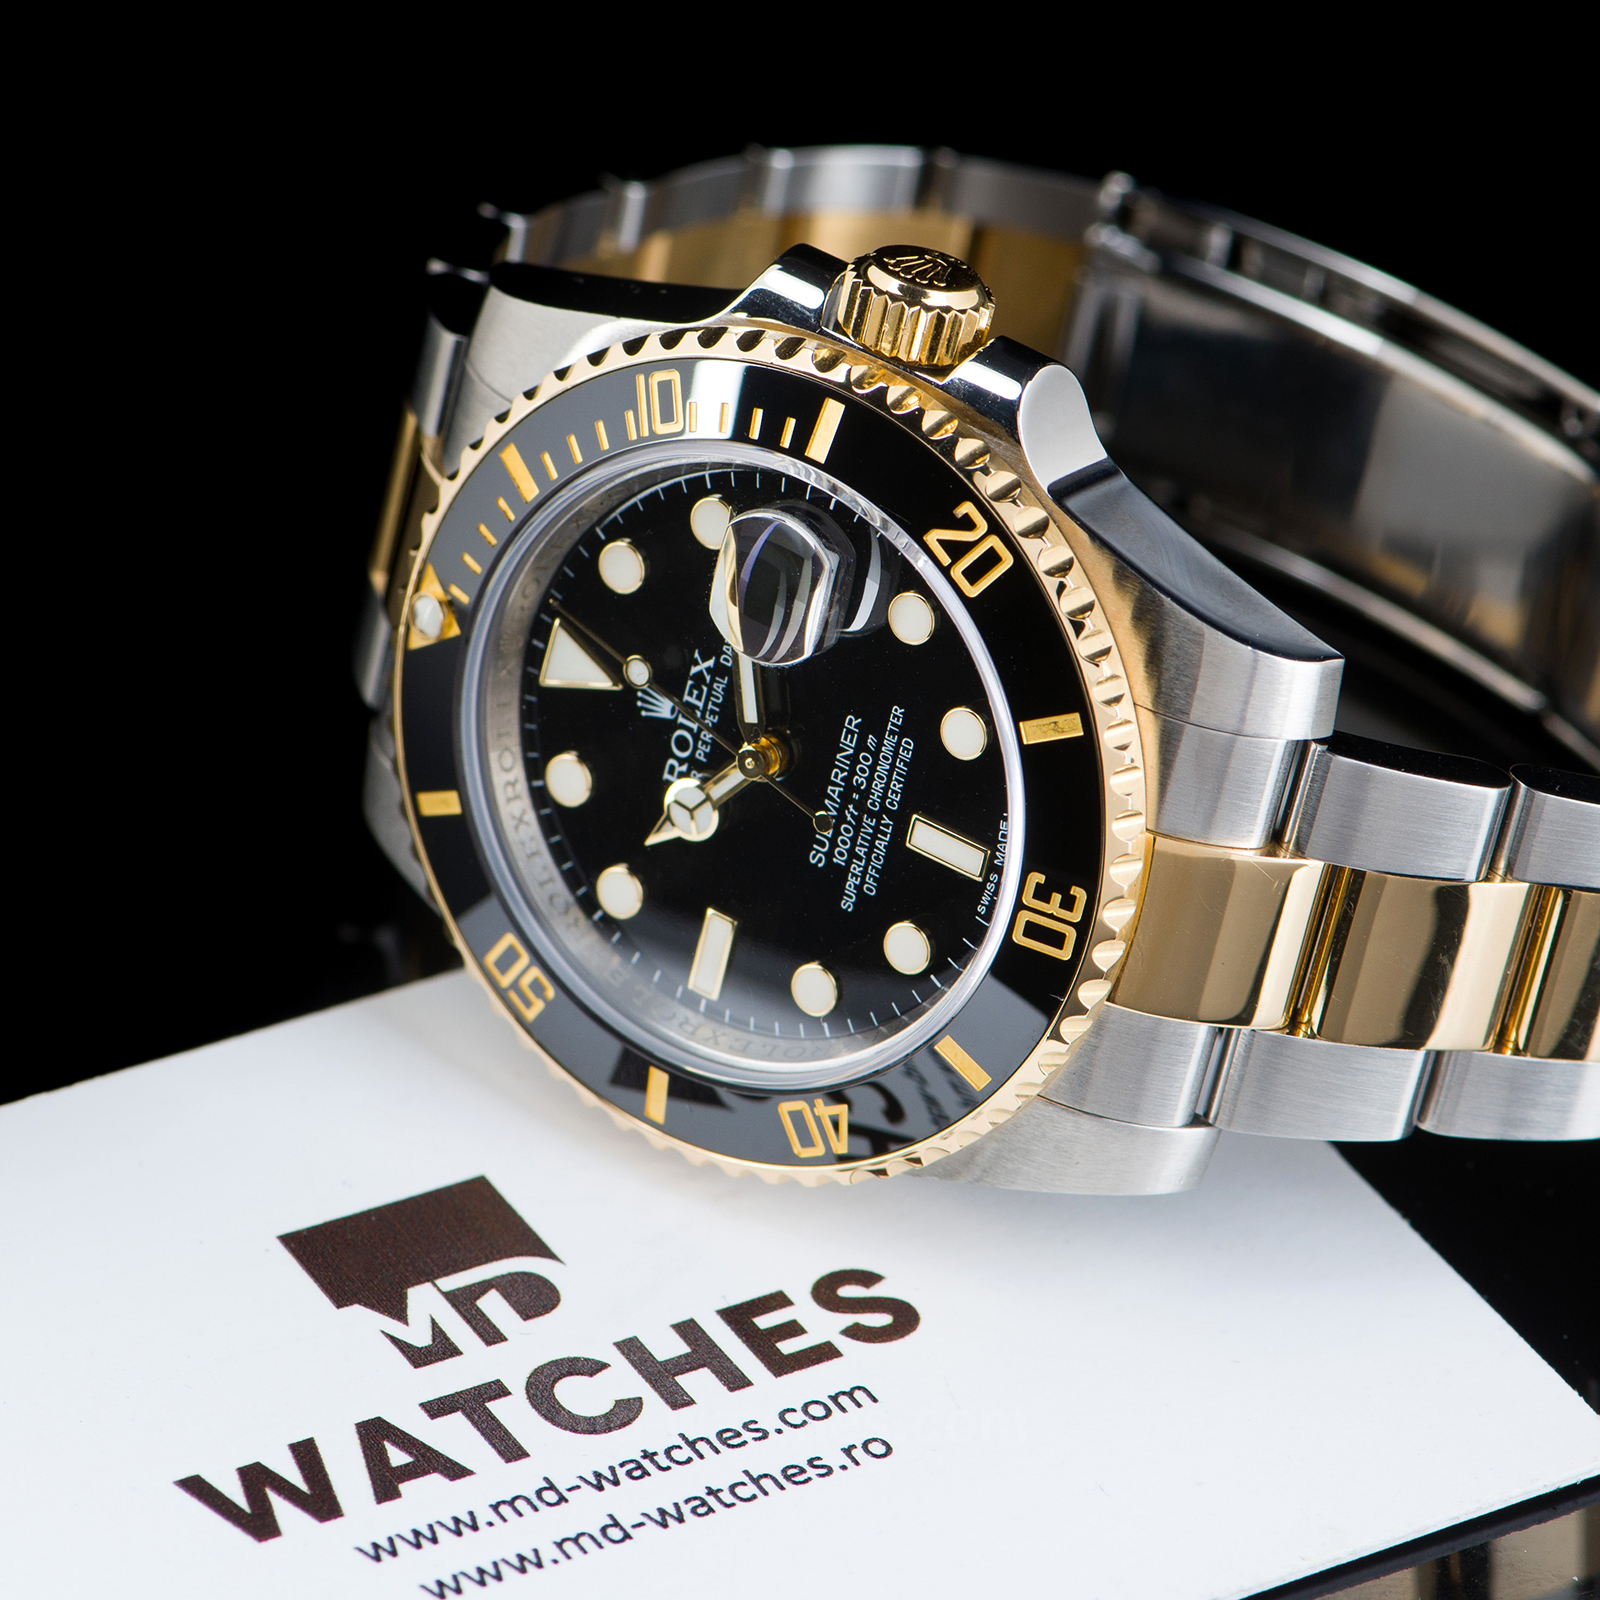 Rolex Submariner Ref: 116613LN Two-tone gold/steel - 40mm - MD